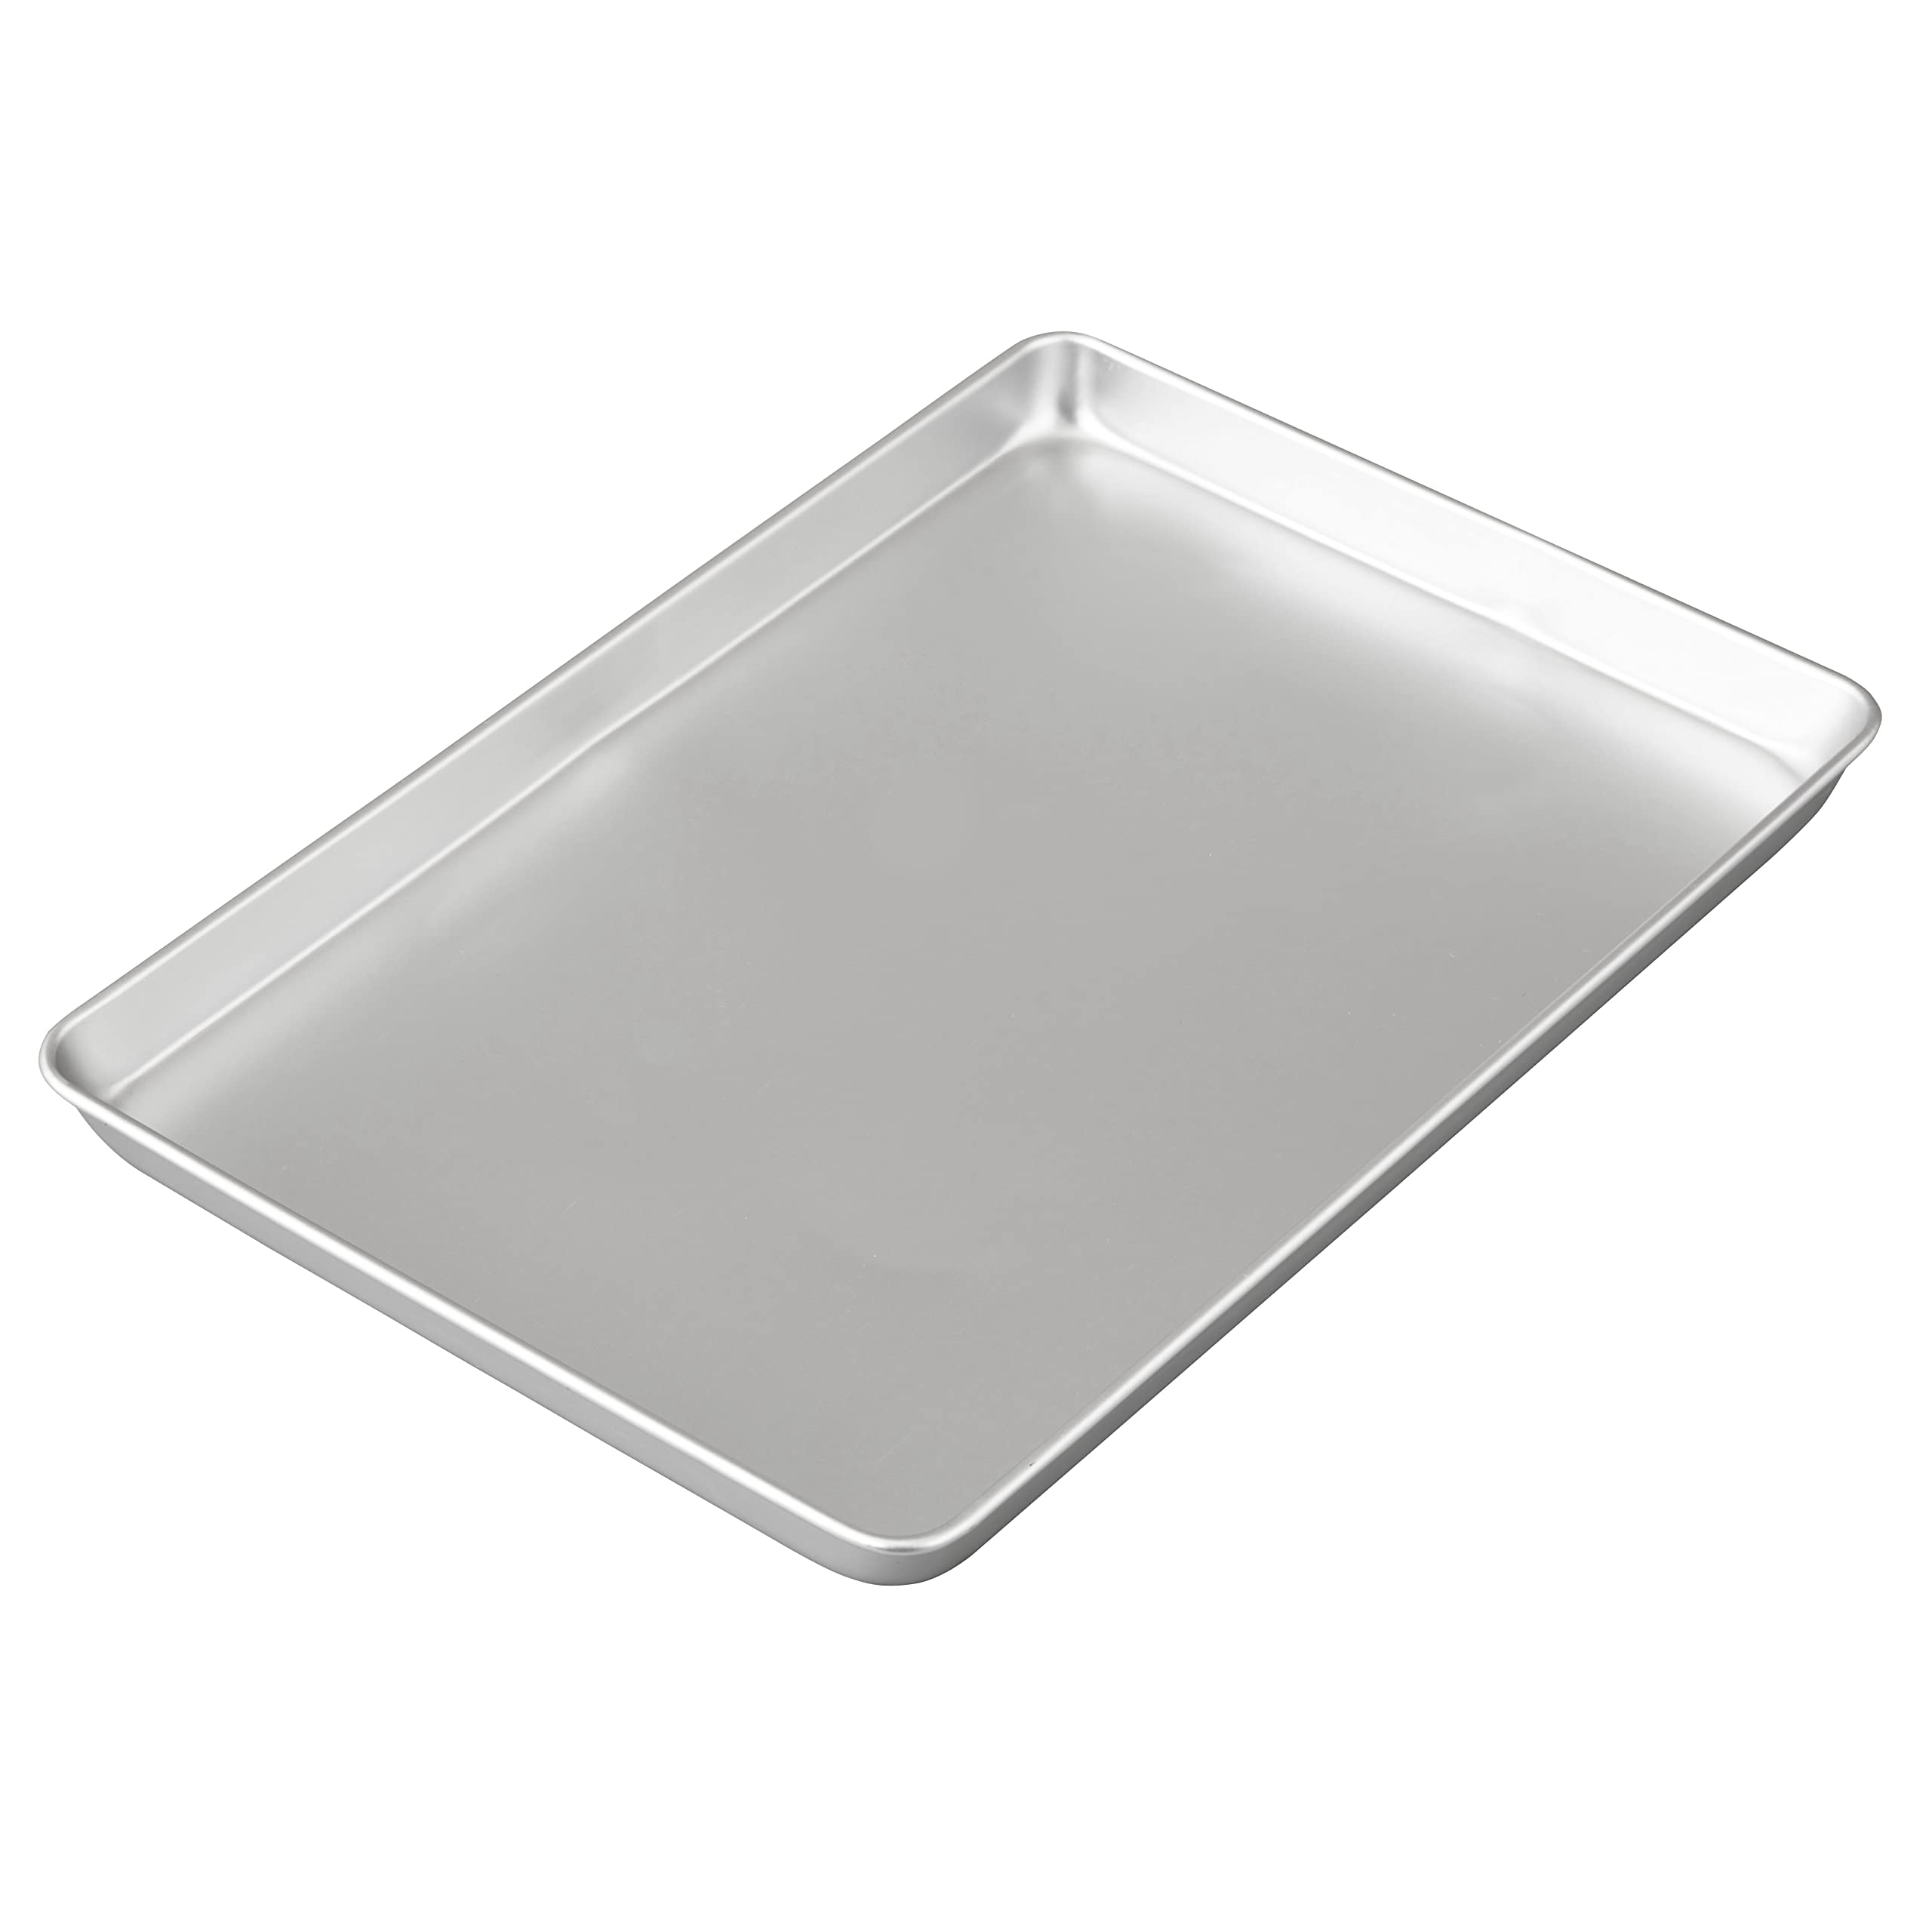 Wilton Performance Baking Pans Aluminum Jelly Roll Pan, 10.5 x 15.5-Inch